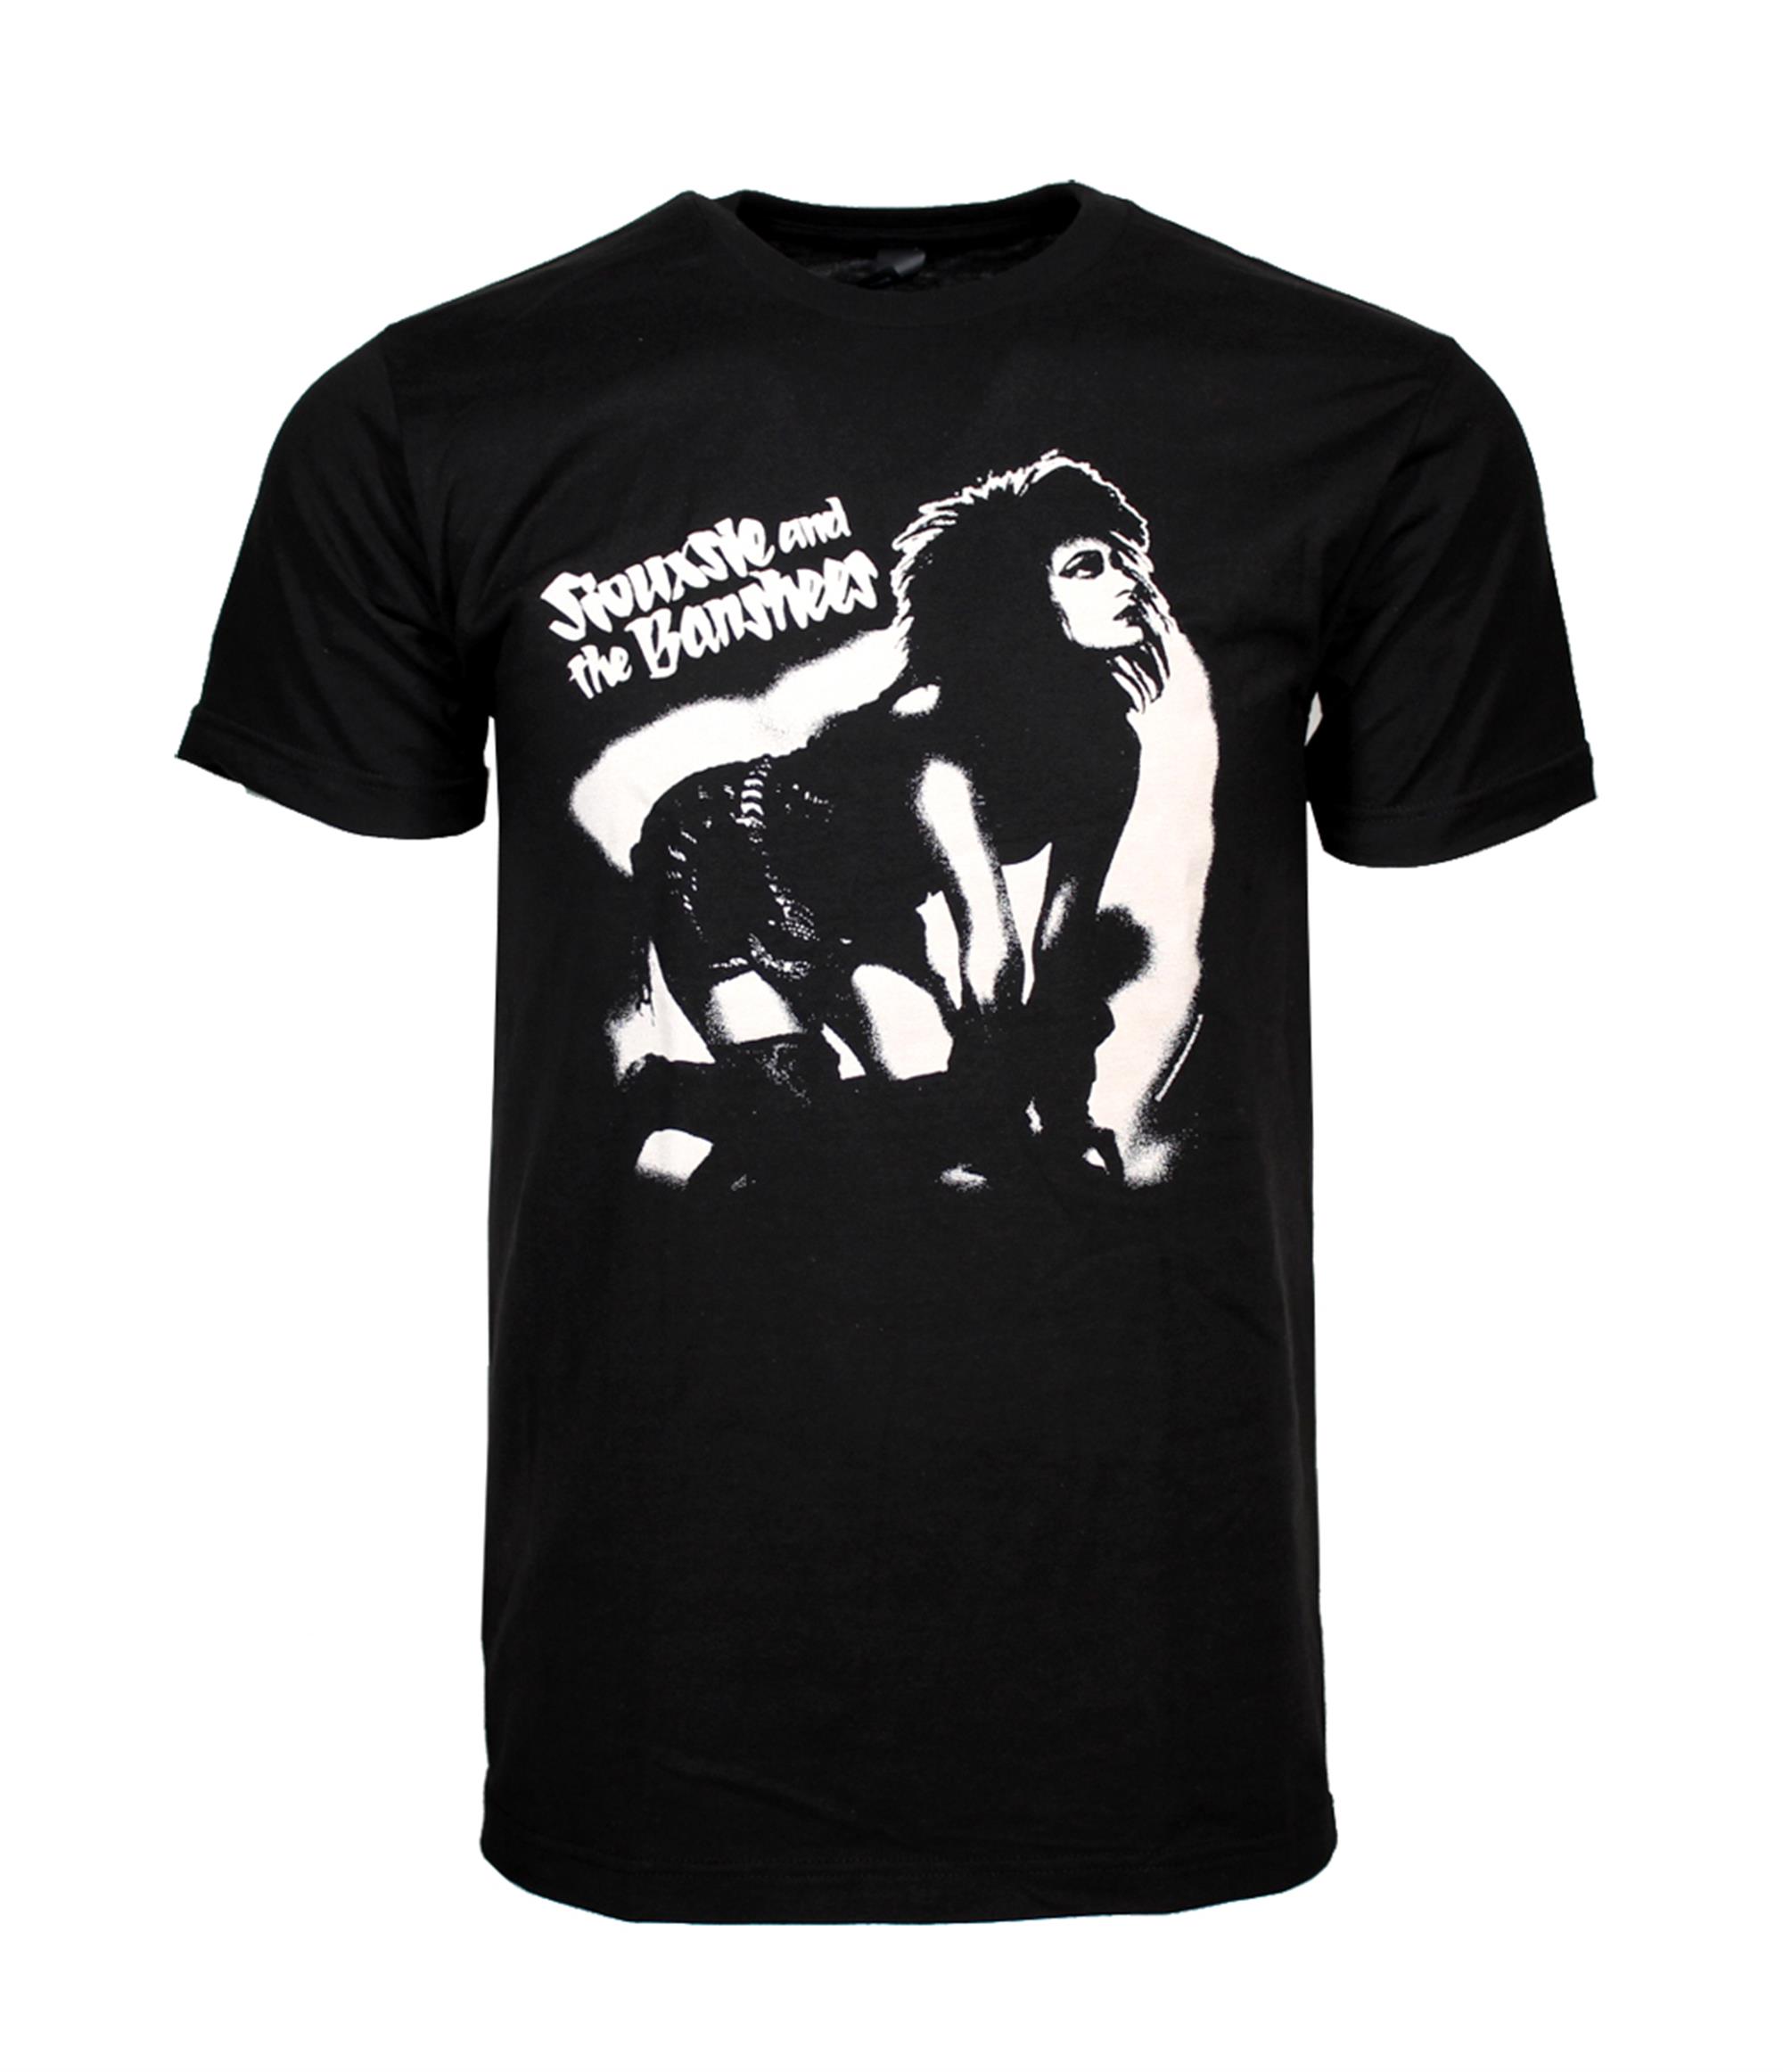 Siouxsie and the Banshees Hands and Knees T-Shirt